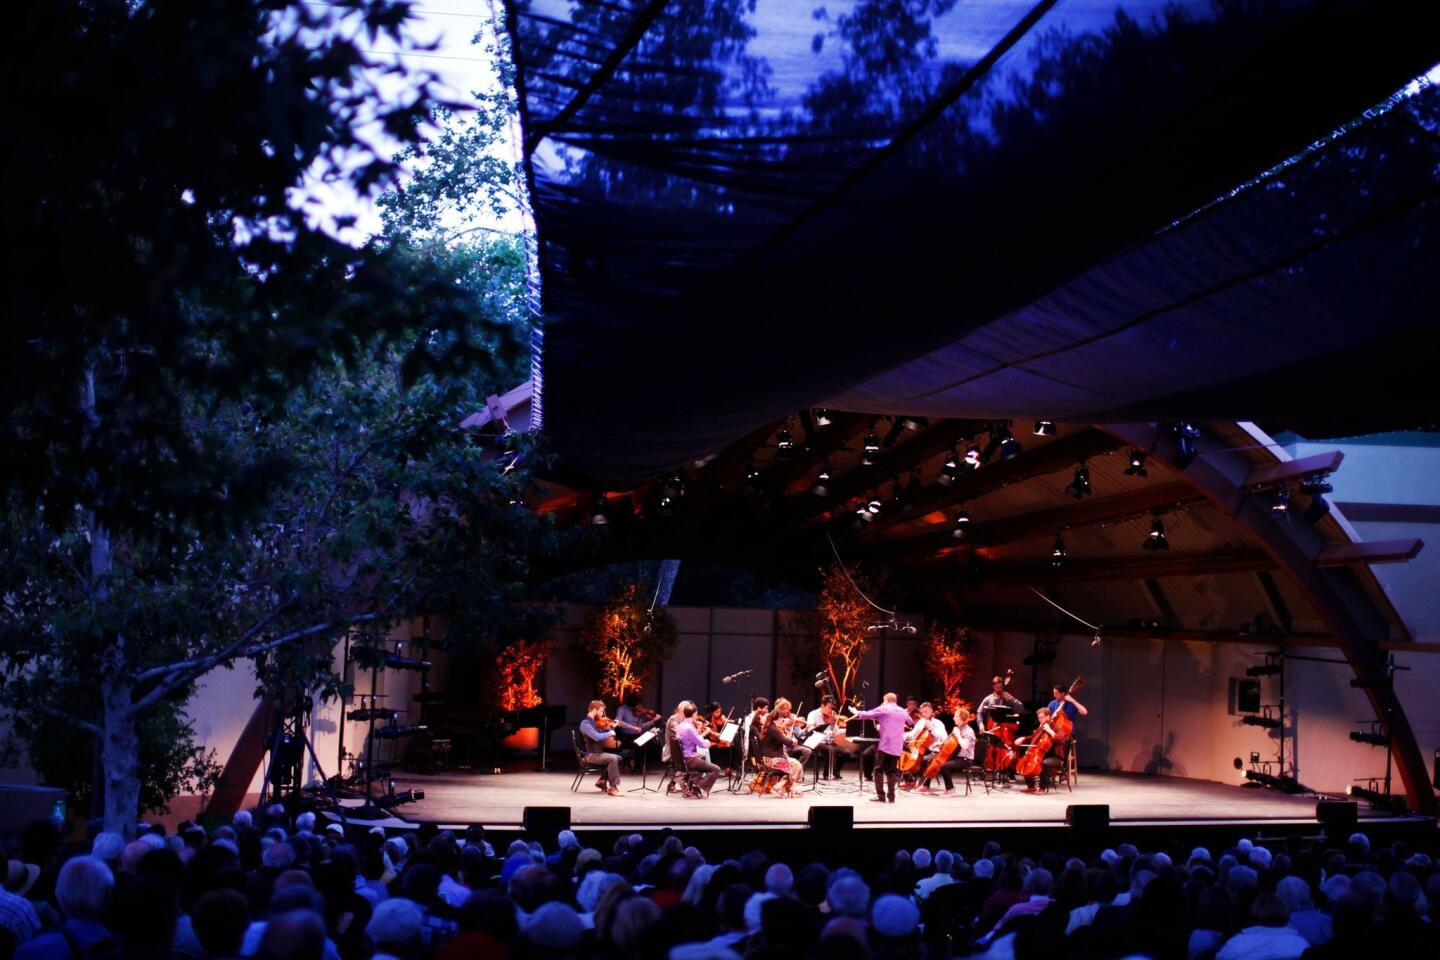 The scene at last year's Ojai Music Festival, as a crowd gathered at the Libbey Bowl. Pianist Jeremy Denk is guest music director for this year's event, June 12-15.